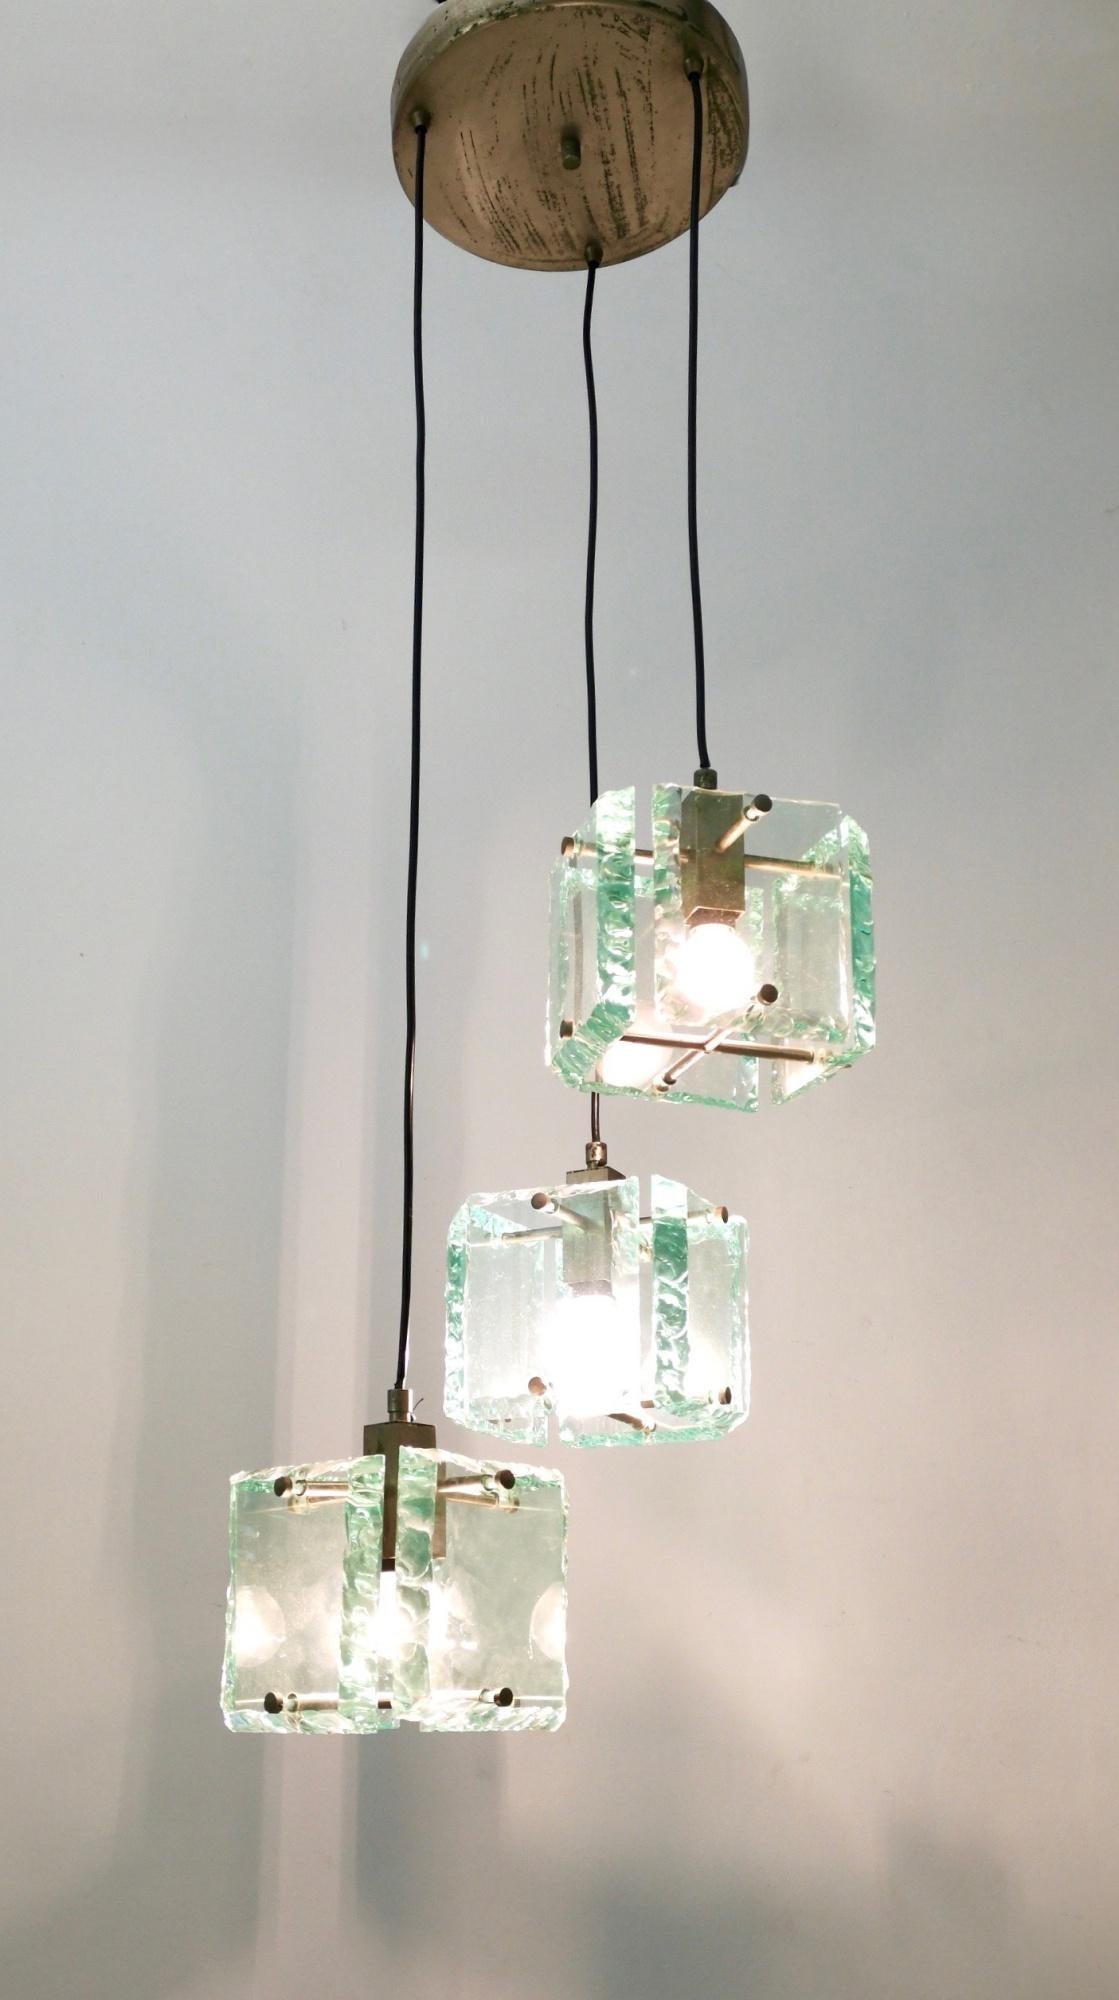 Made in Italy, 1960s. 
This pendant features thick Nile green hammered glass lampshades and varnished metal parts.
The metal parts may show slight traces of oxidation, but no rust, while the glasses are in excellent original condition.
Overall, it's